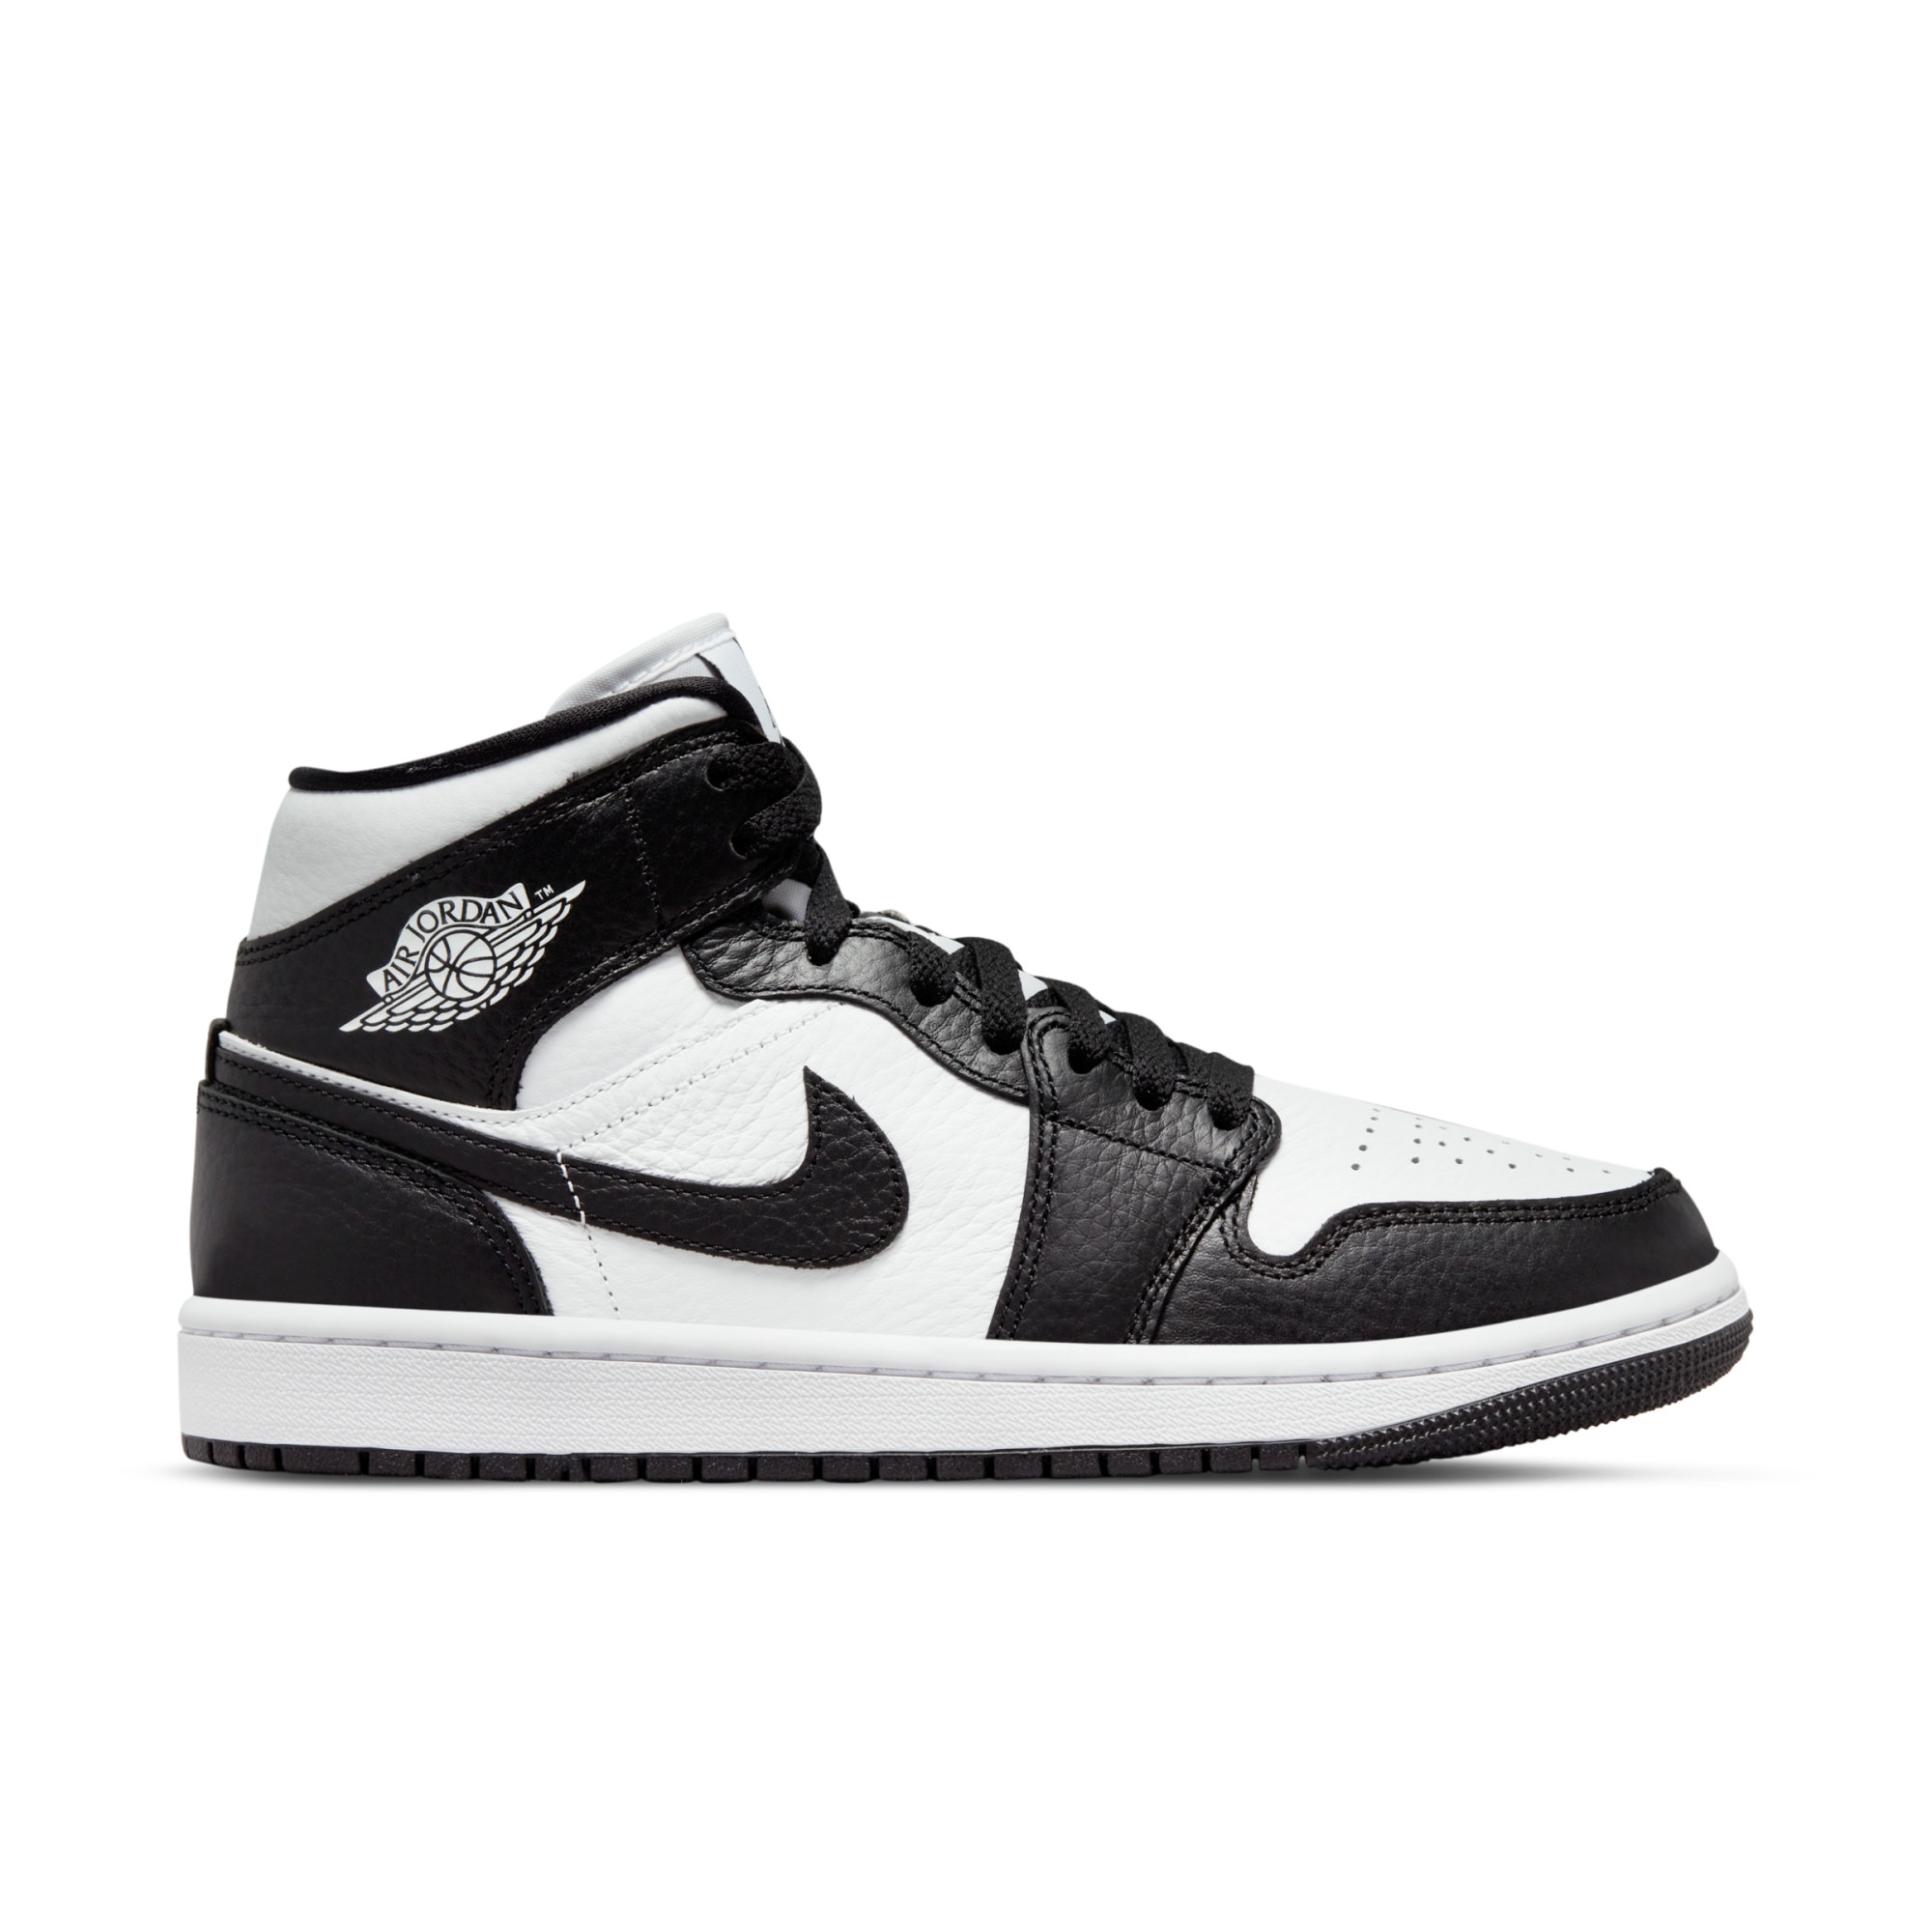 how much are the black and white jordans